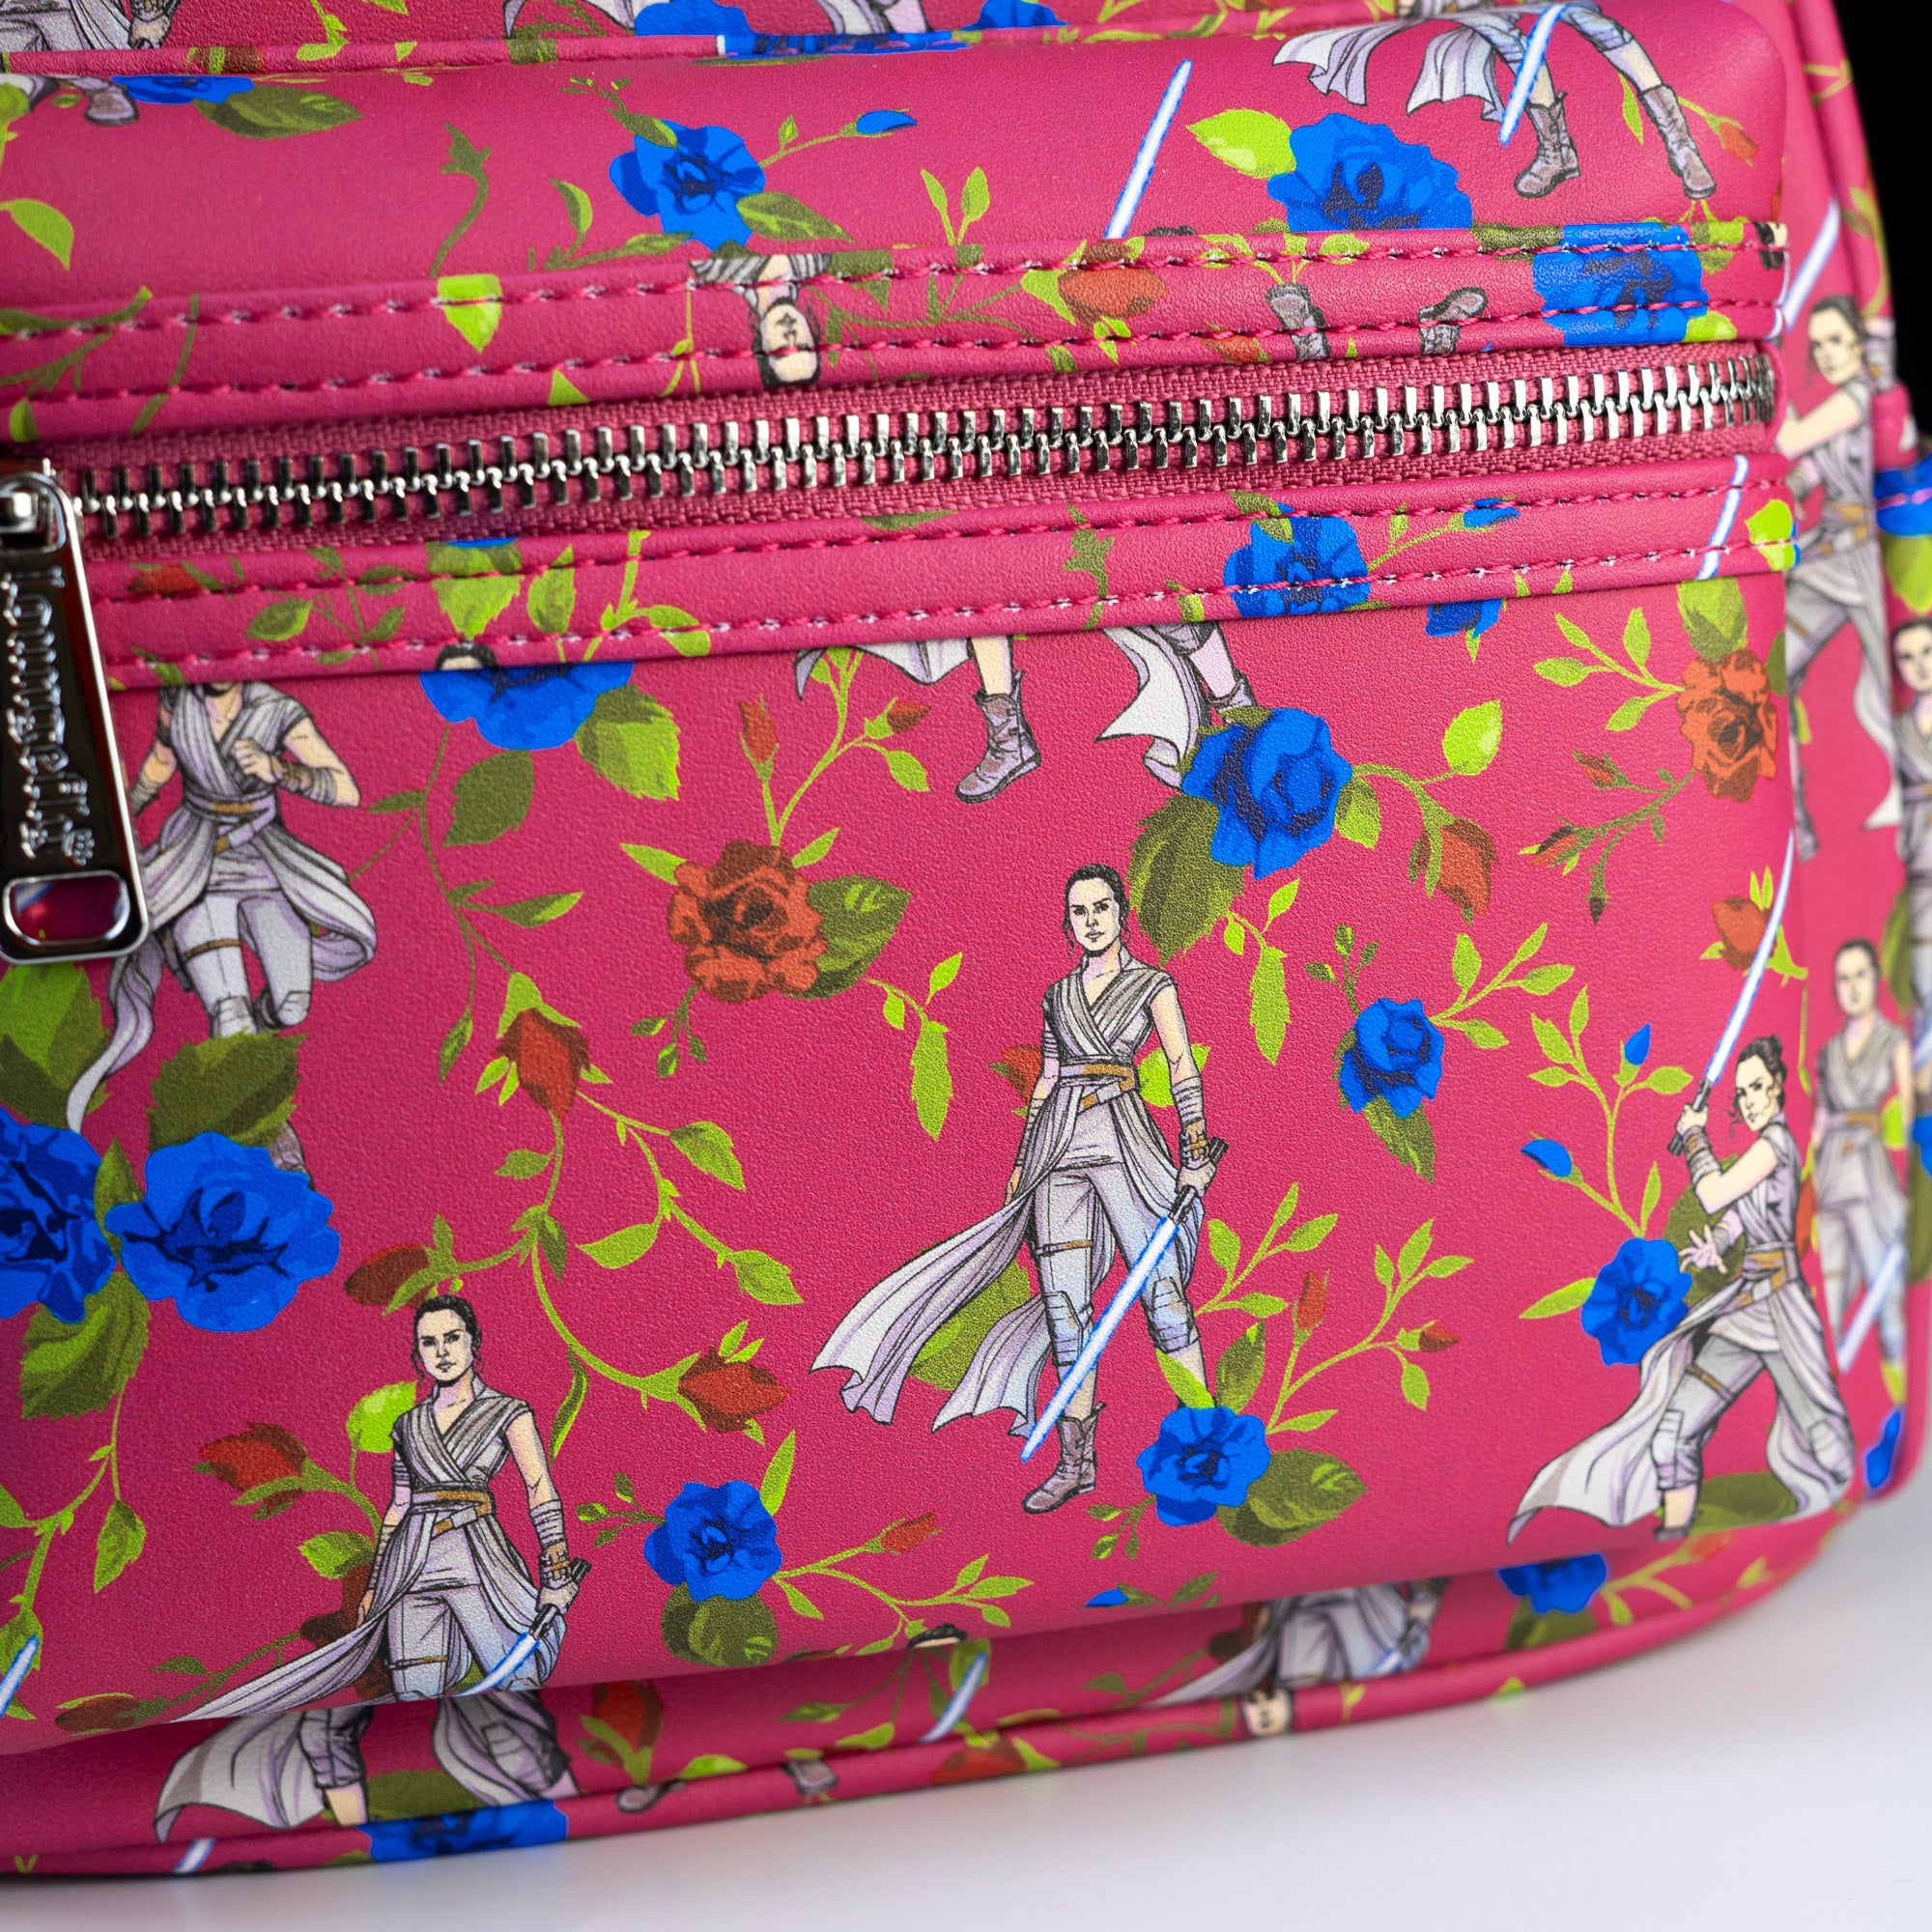 Loungefly x Star Wars Rey Floral All Over Print Mini Backpack